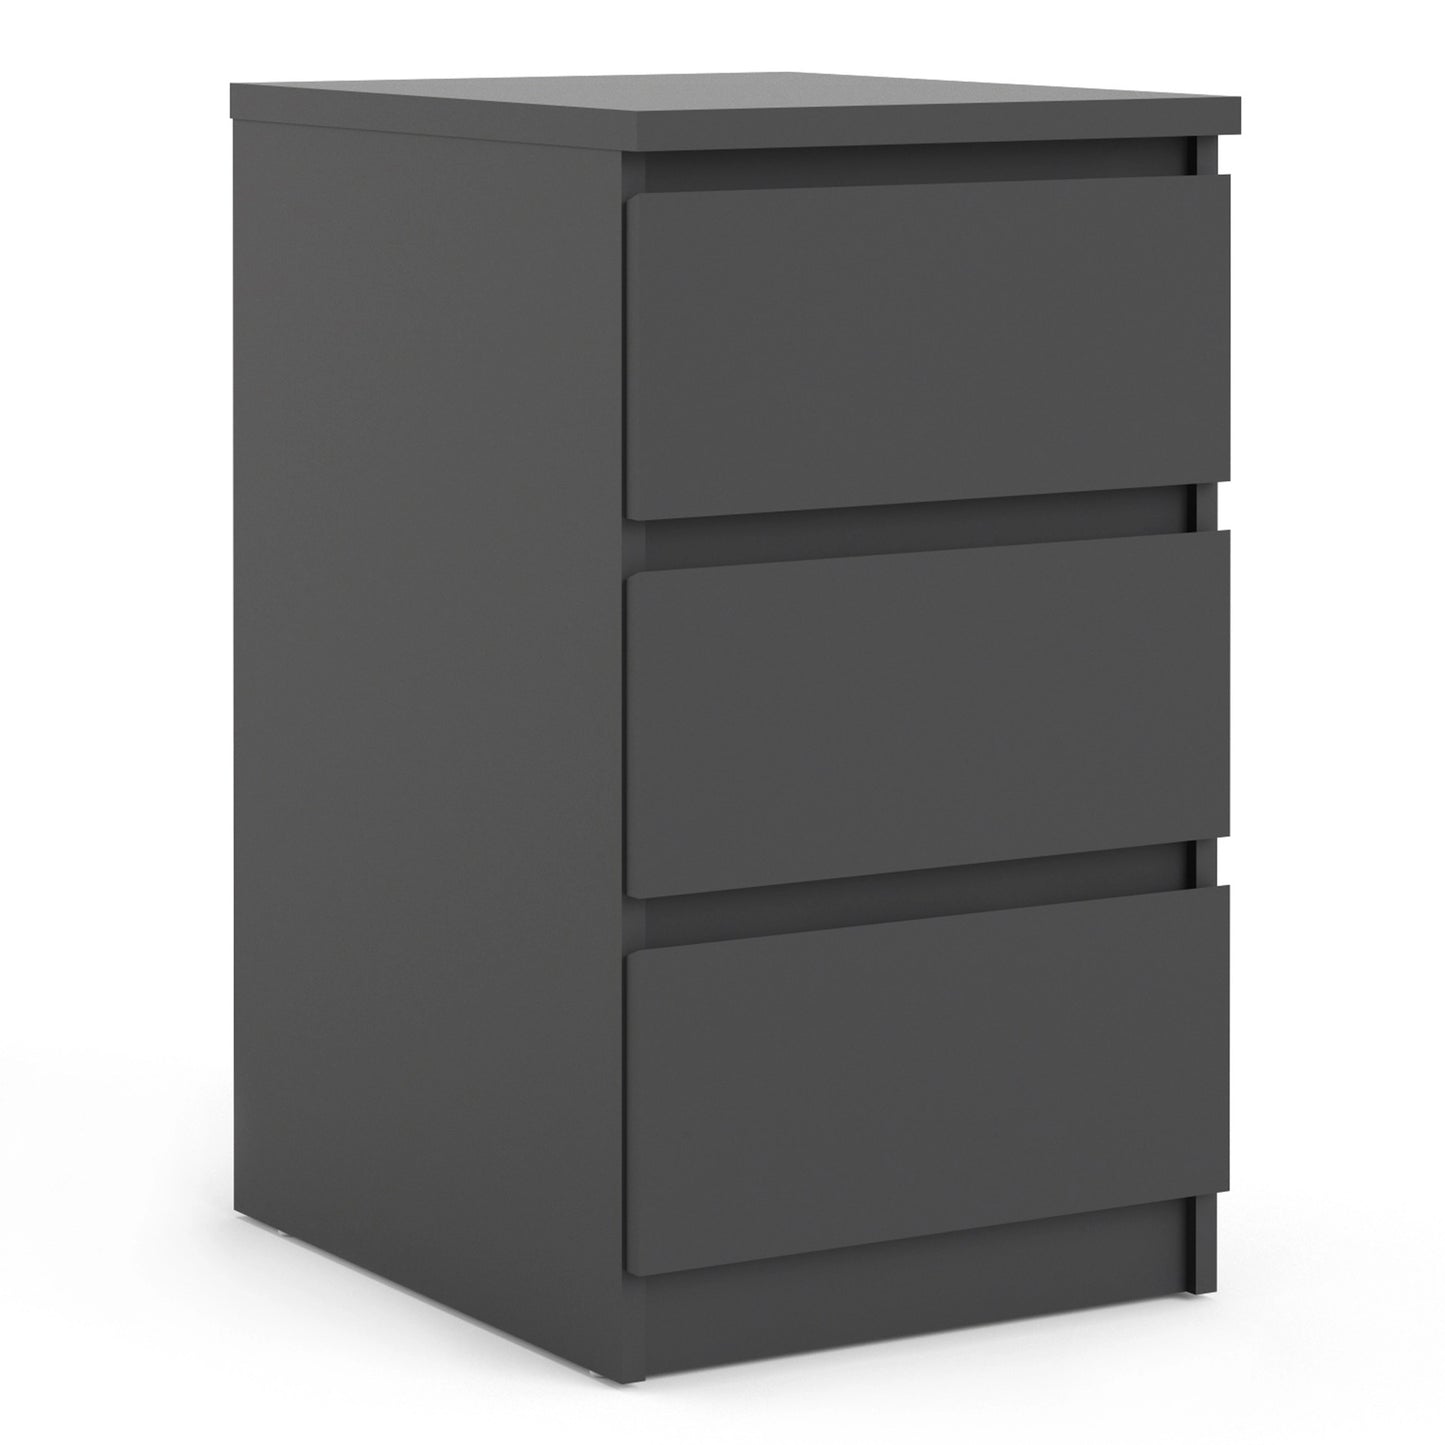 Furniture To Go Naia Bedside 3 Drawers in Black Matt